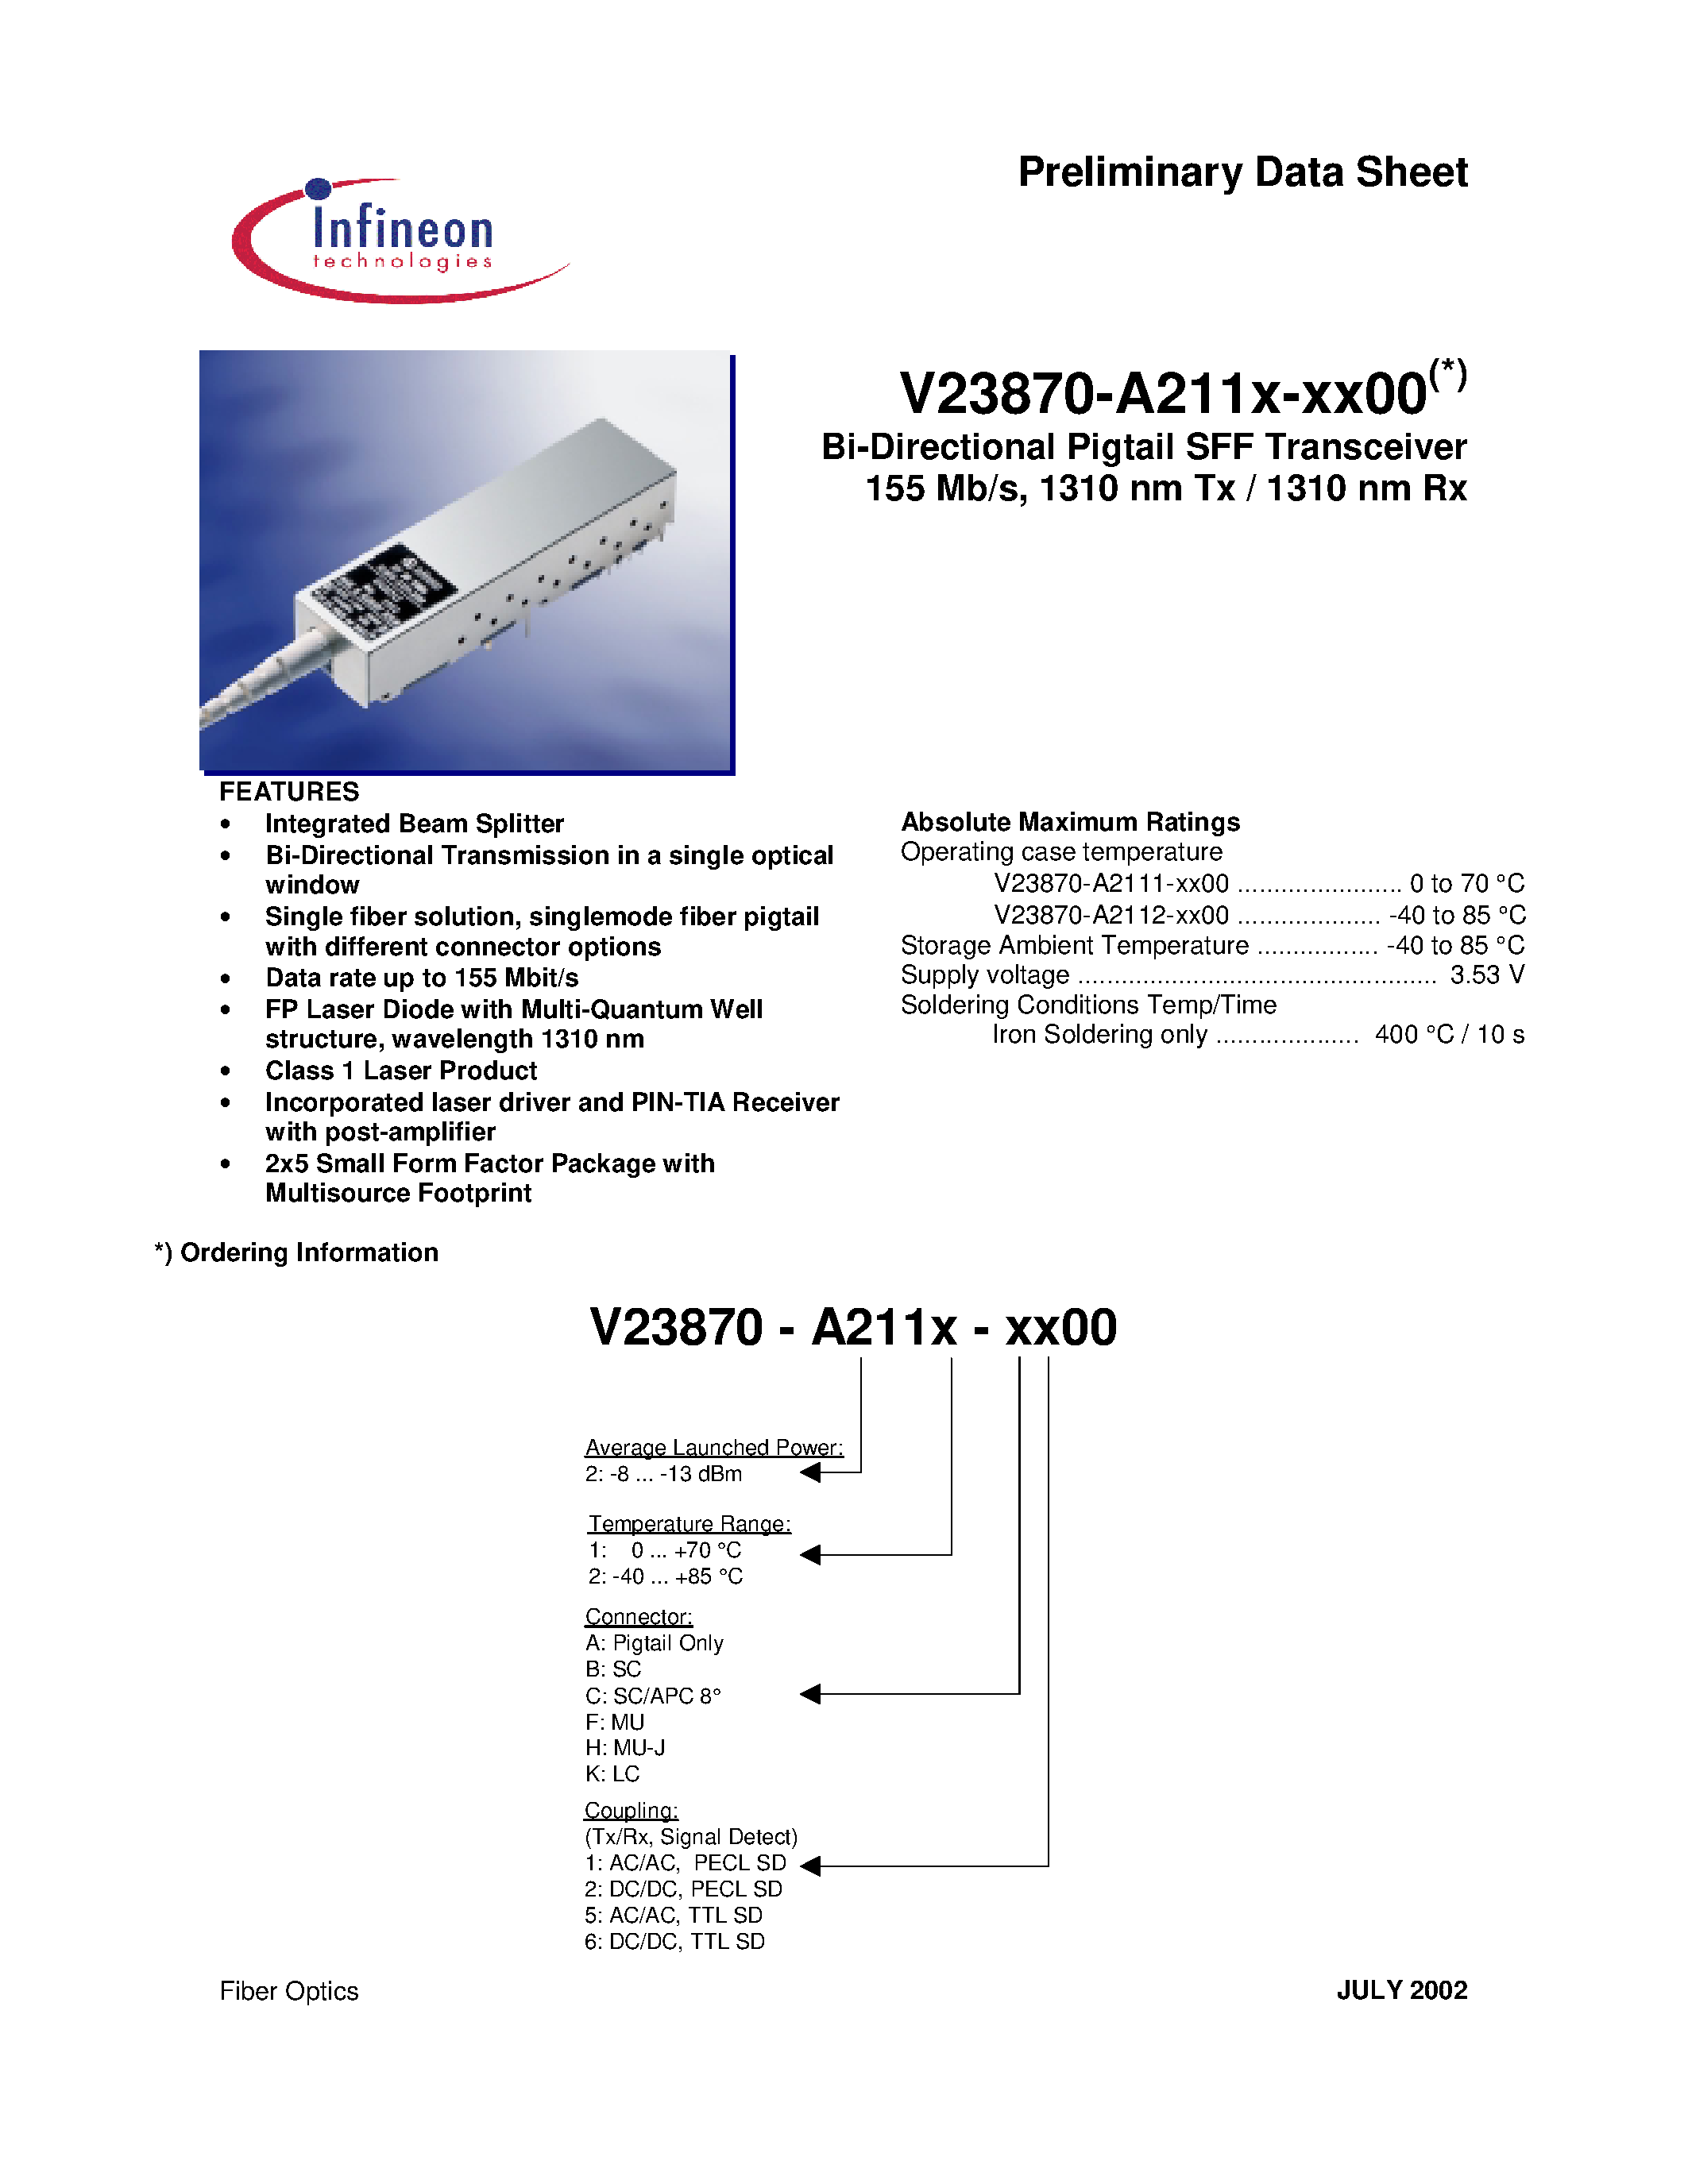 Datasheet V23870-A2112-K500 - Bi-Directional Pigtail SFF Transceiver 155 Mb/s/ 1310 nm Tx / 1310 nm Rx page 1